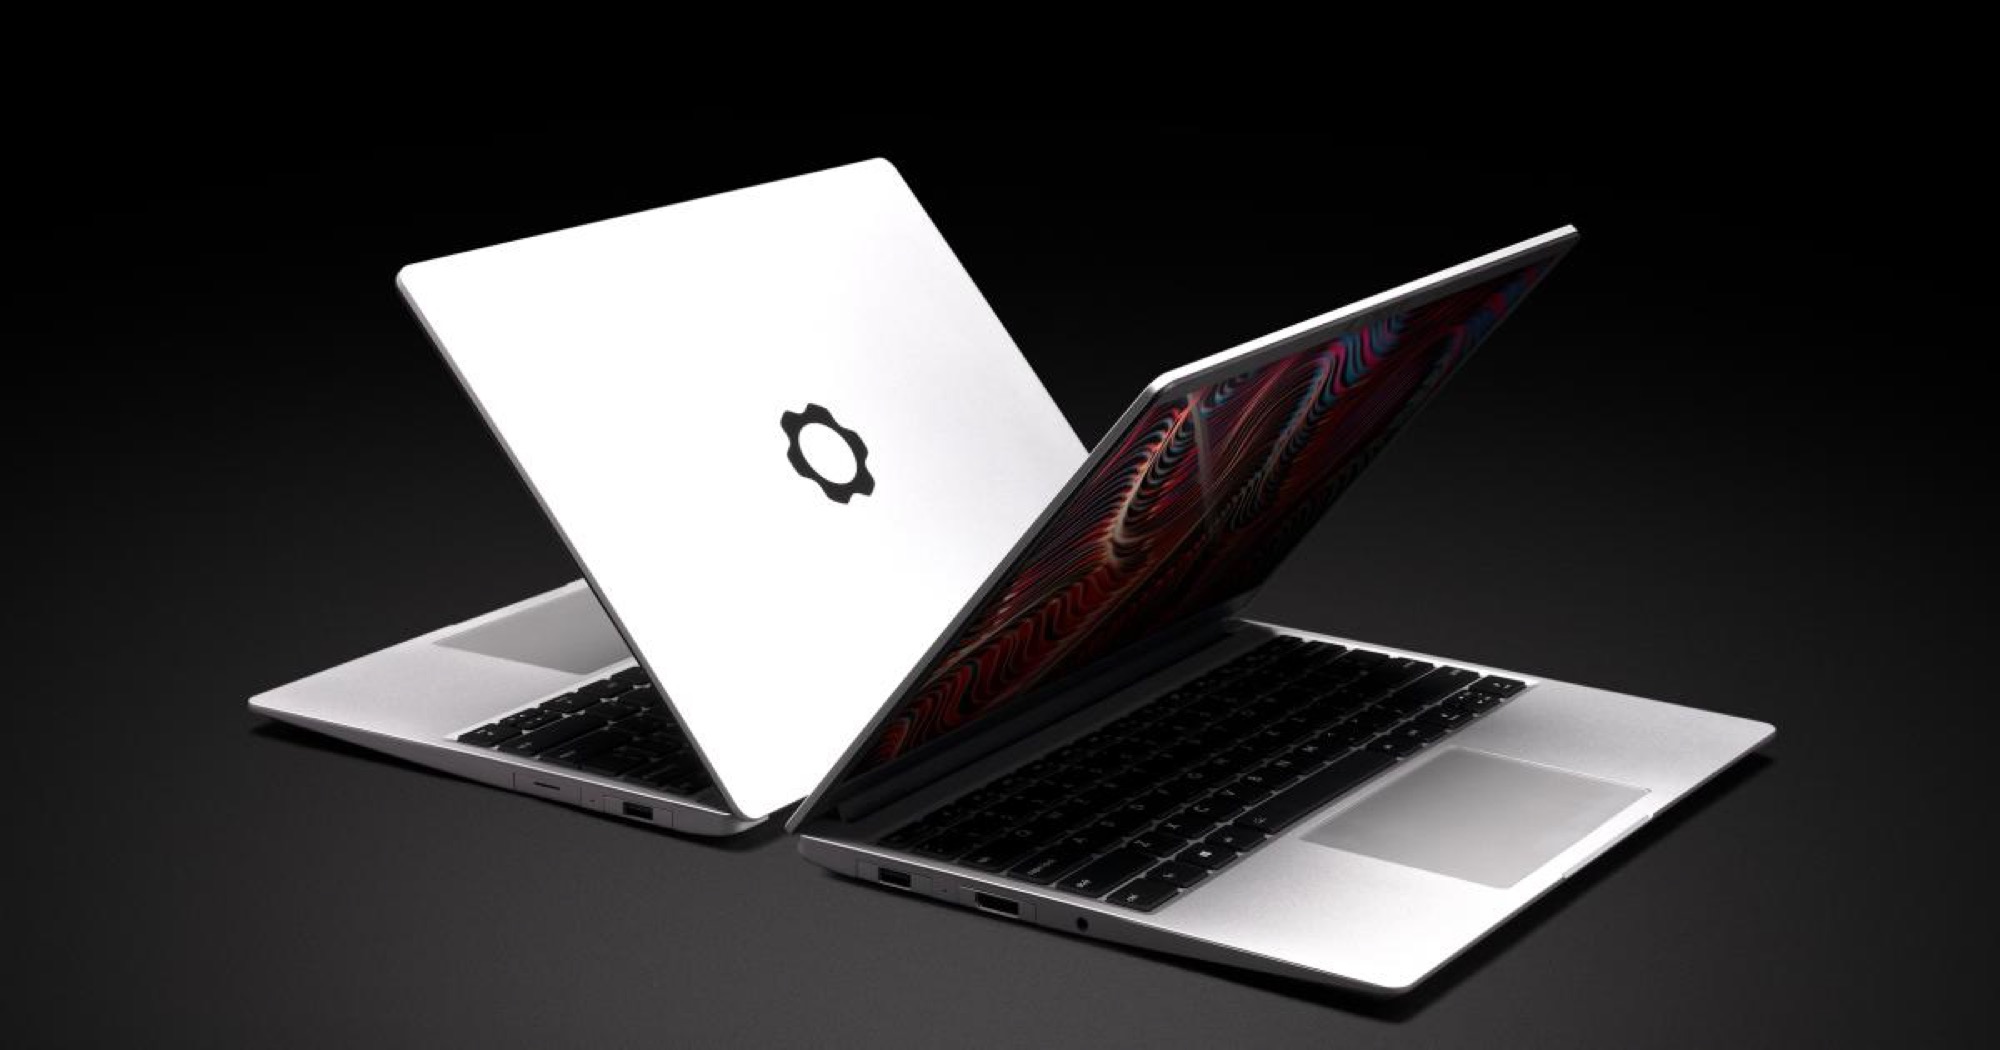 two big announcements for a new era of laptops